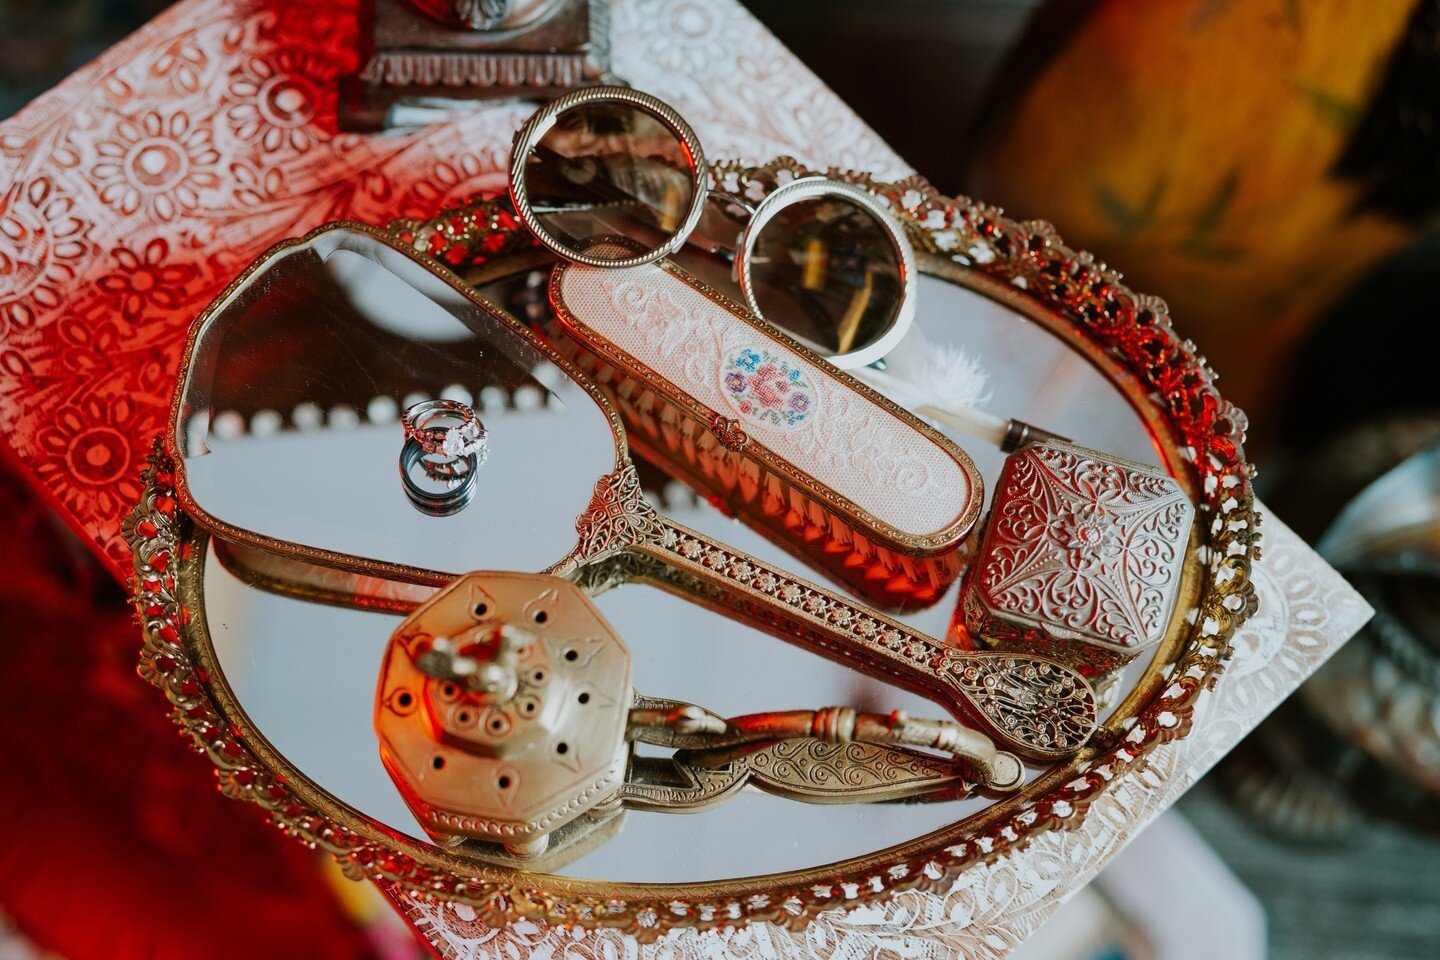 The bride brought props to help stage her beautiful details, now that's the extra level we're on board with!⁠
⁠
⁠
#bostonwedding #bostonweddings #bostonweddingphotographer ⁠
#indianwedding #desiwedding #indianweddingphotographer #IndianWeddings #indi